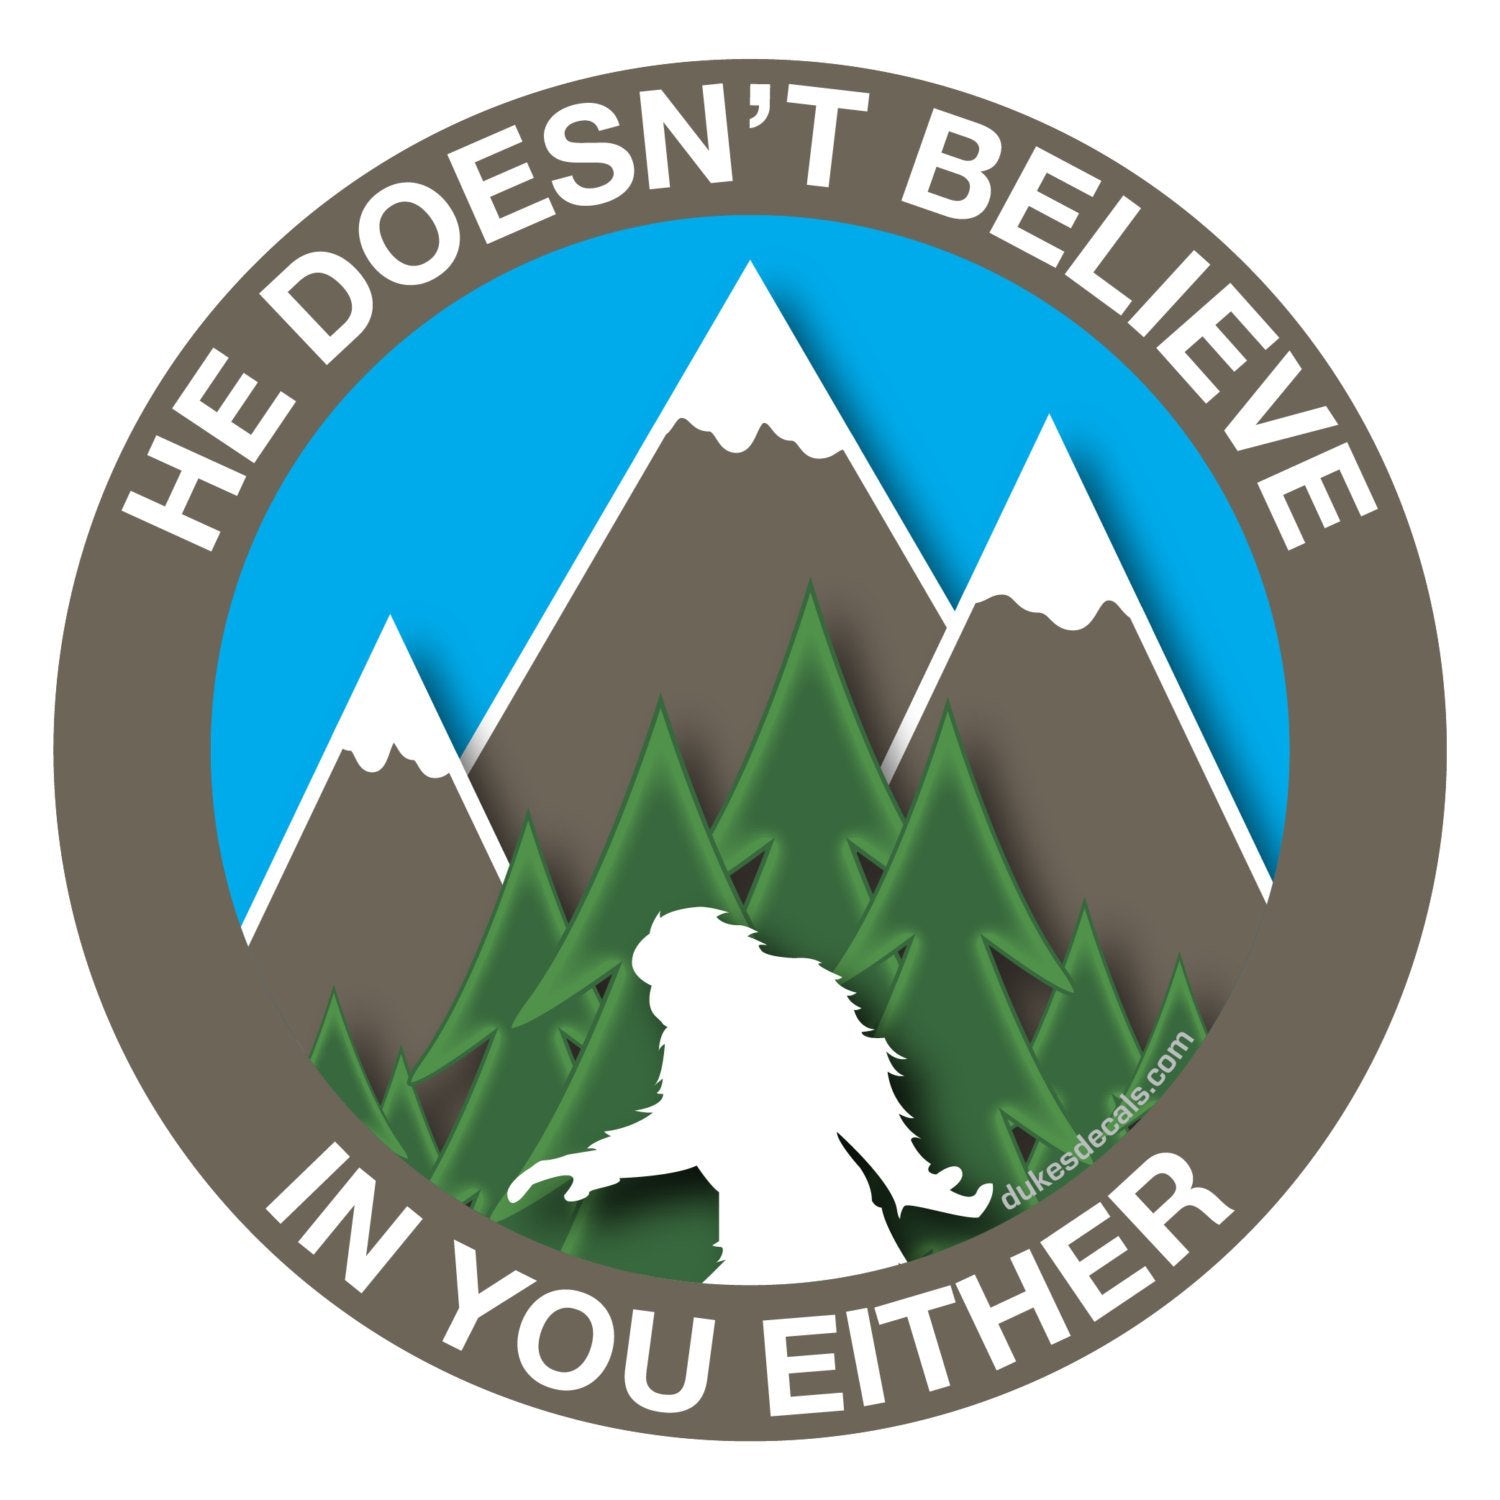 He Doesn't Believe In You Either Decal - Bigfoot Decal, Sasquatch Sticker, Laptop Decal - Dukes Decals